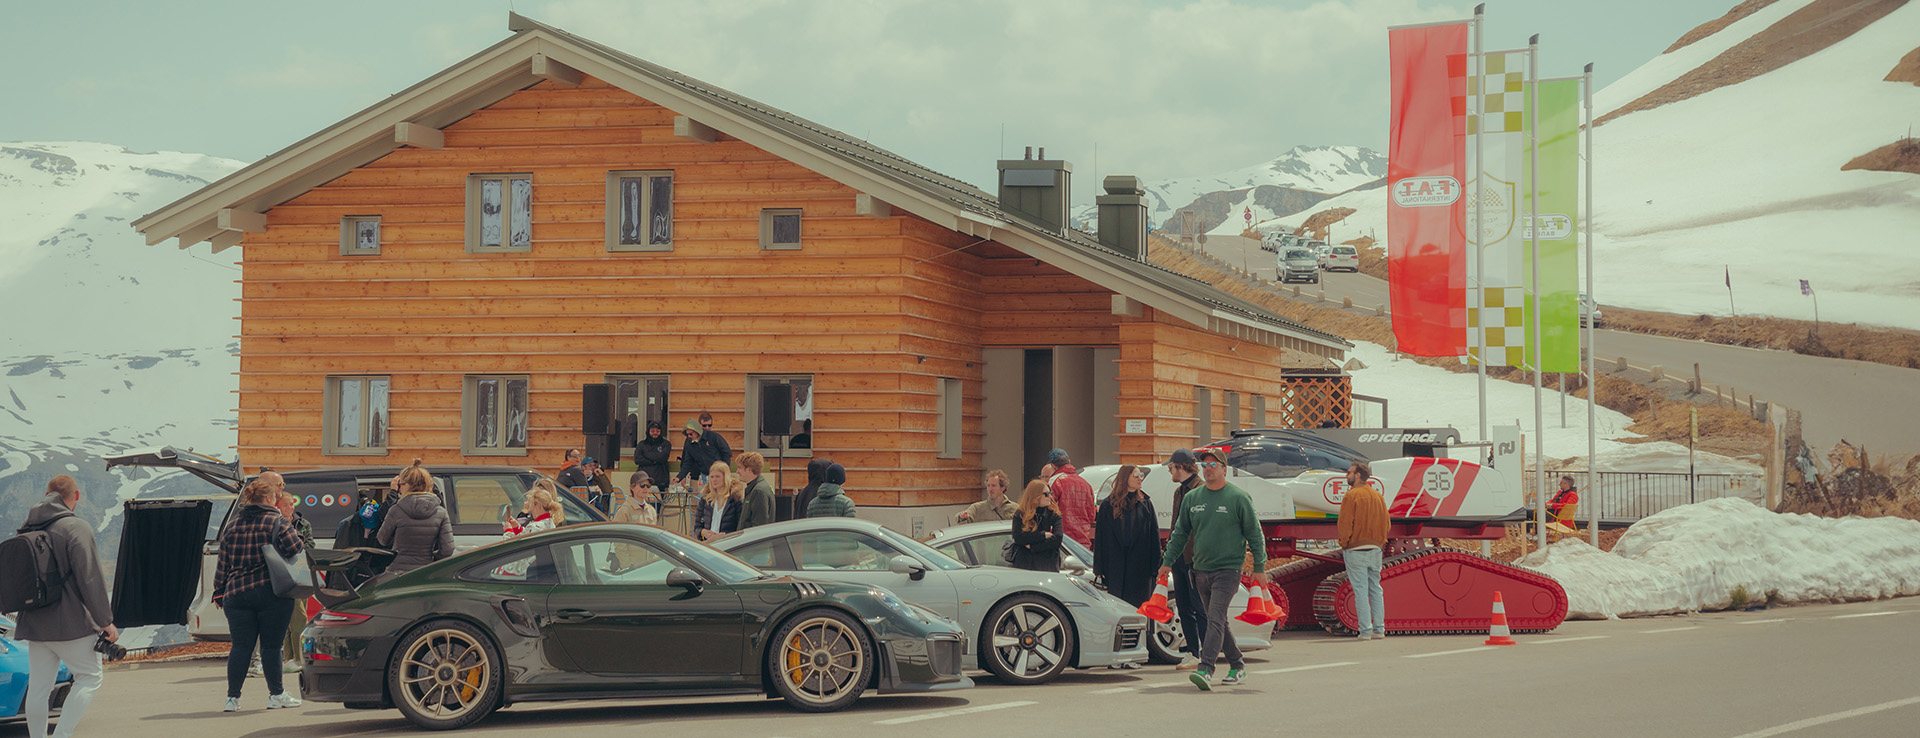 People and Porsche cars outside F.A.T. Mankei, Grossglockner Pass, Austria